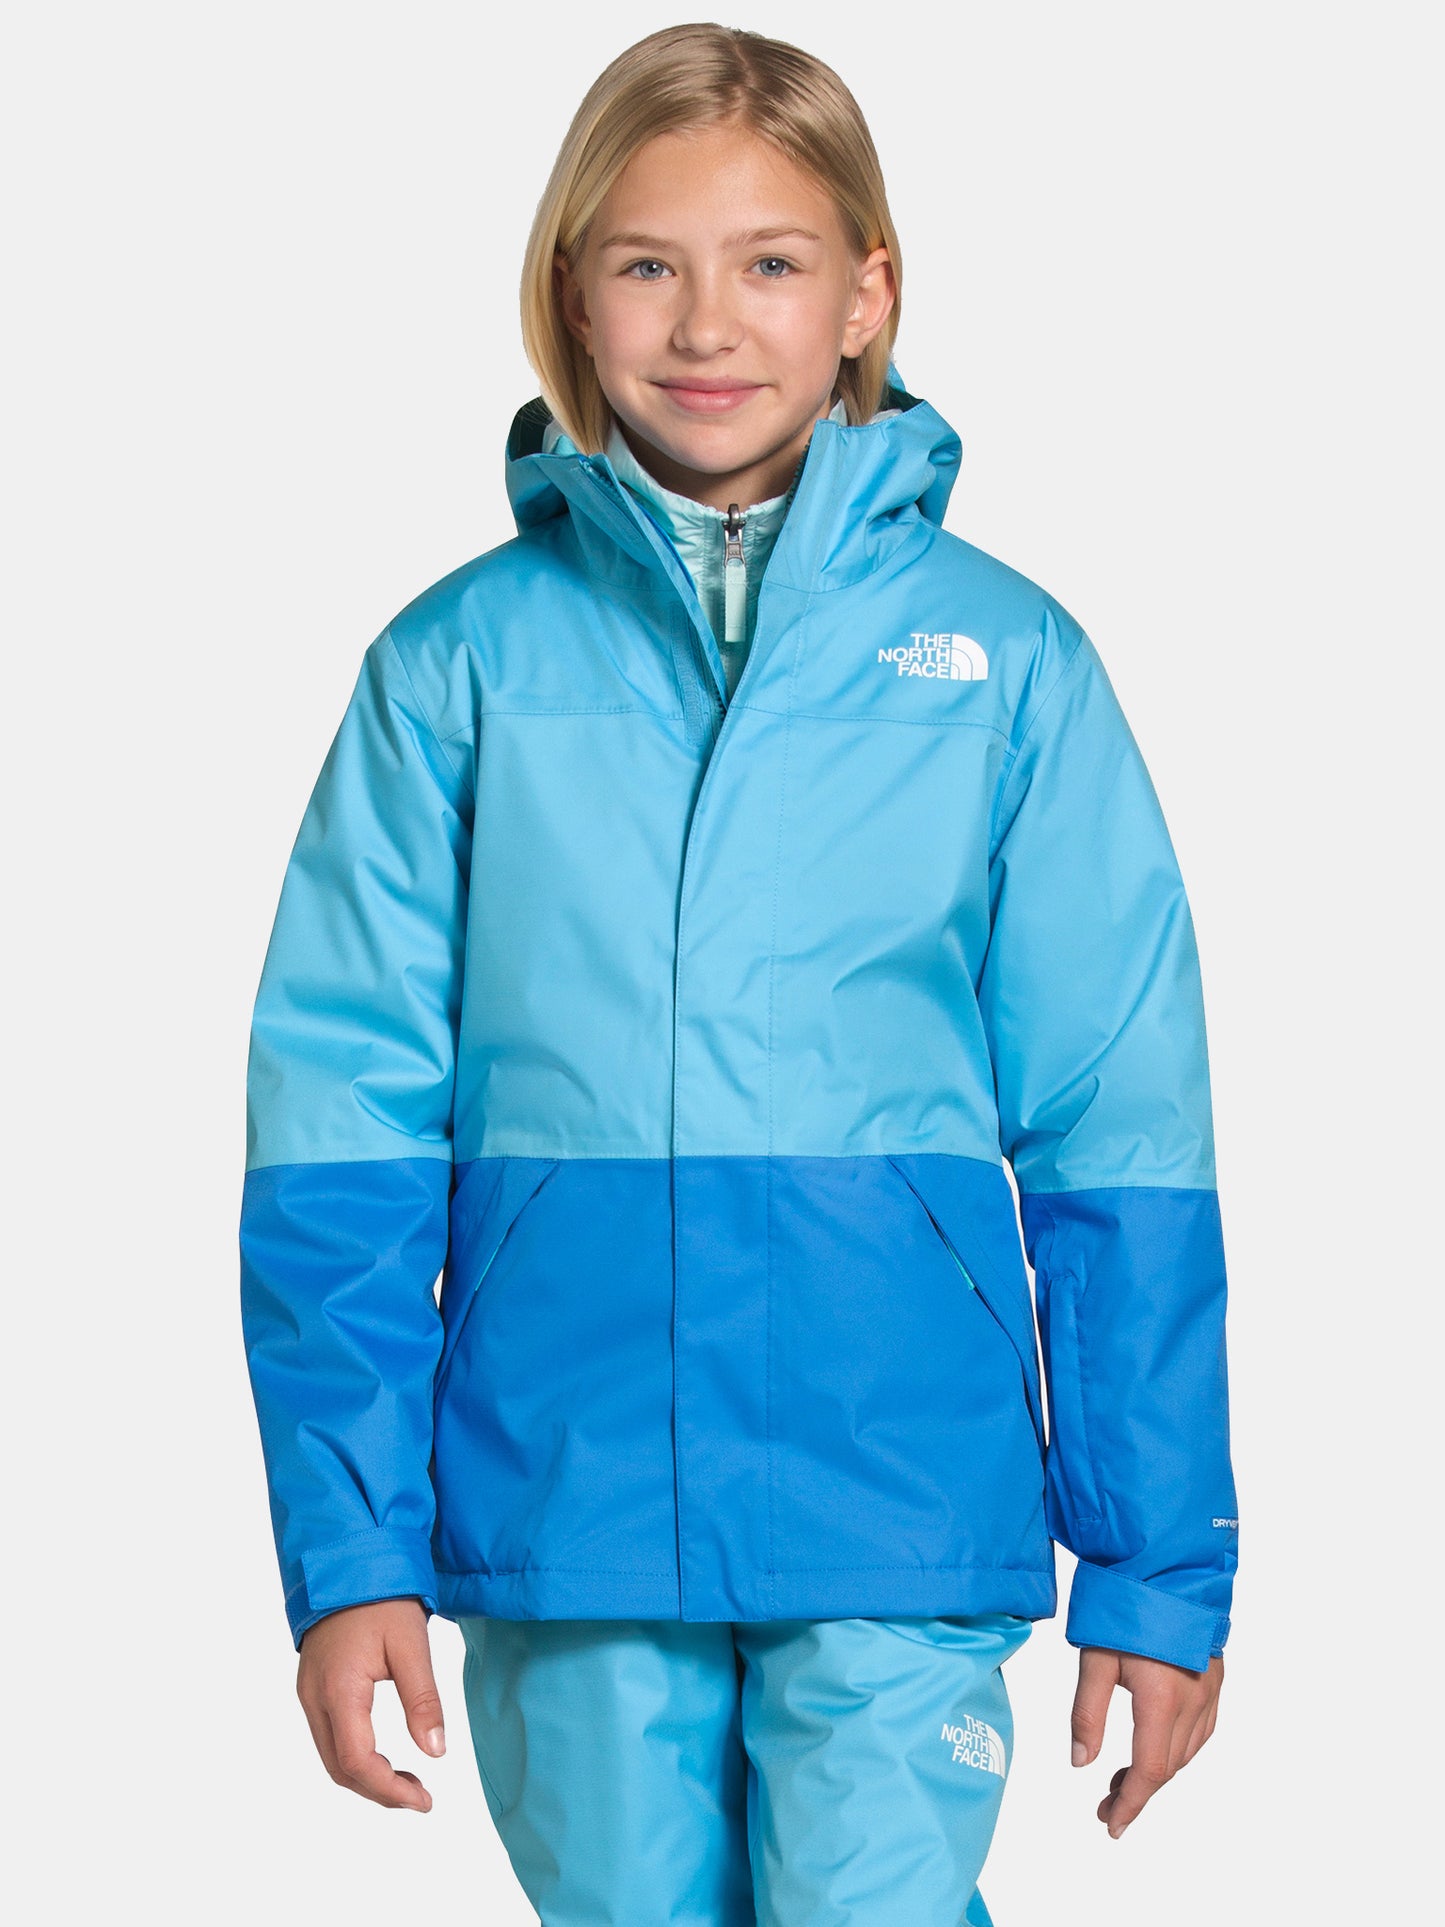 The North Face Girls' Freedom Triclimate Jacket